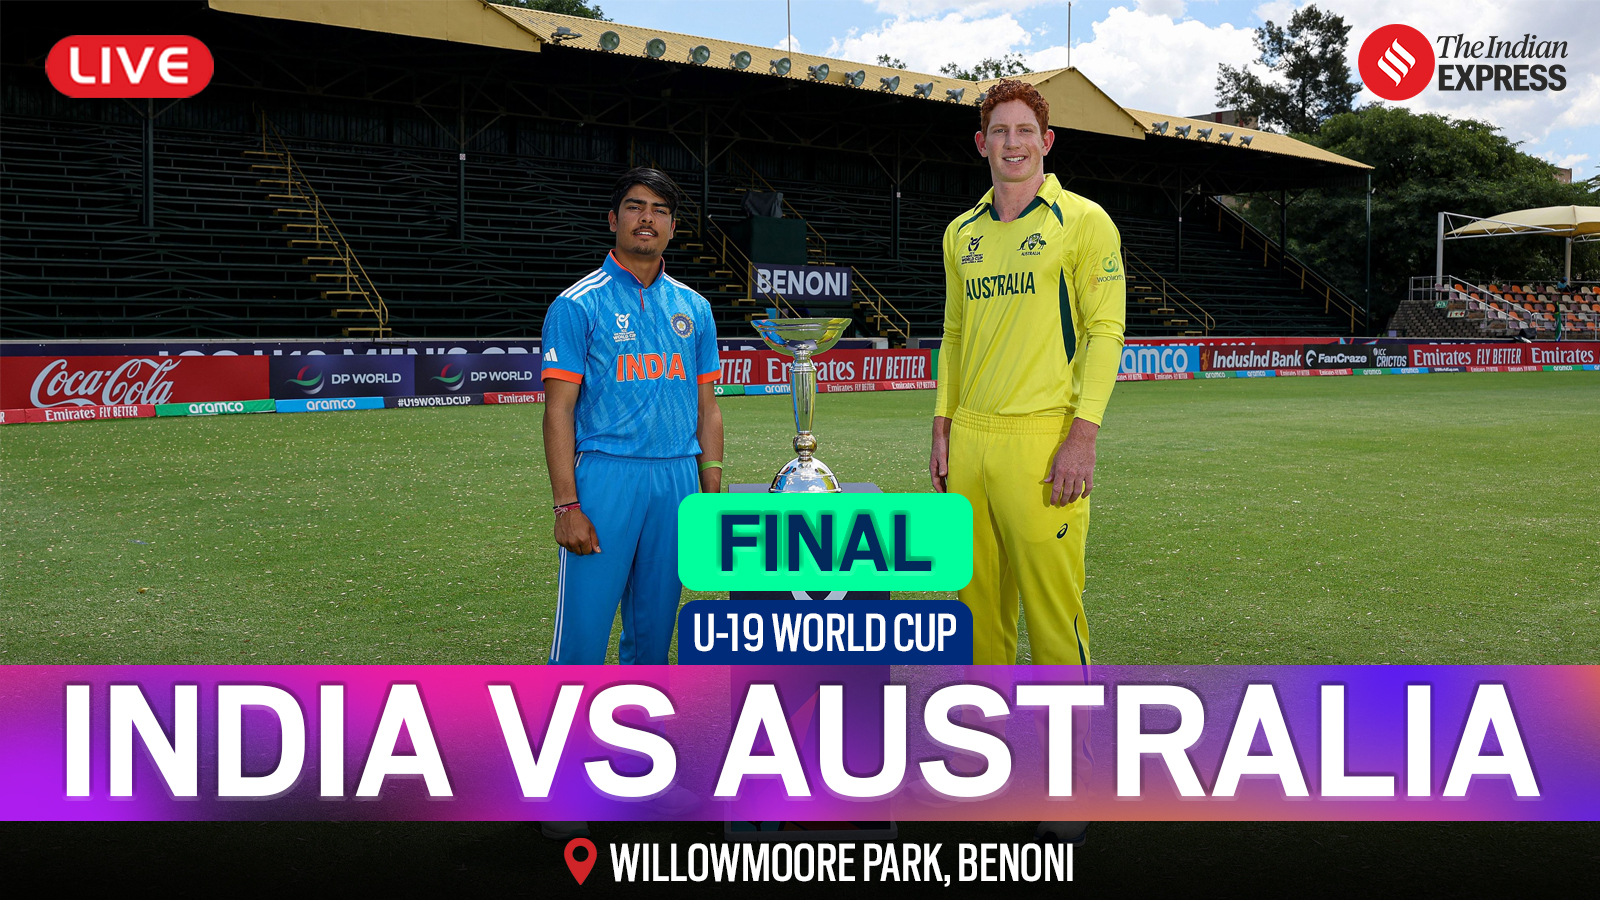 Raj Limbani Takes 3 Wickets as Australia Reaches 245/7 in U19 World Cup 2024 Final against India: Live Score and Cricket News